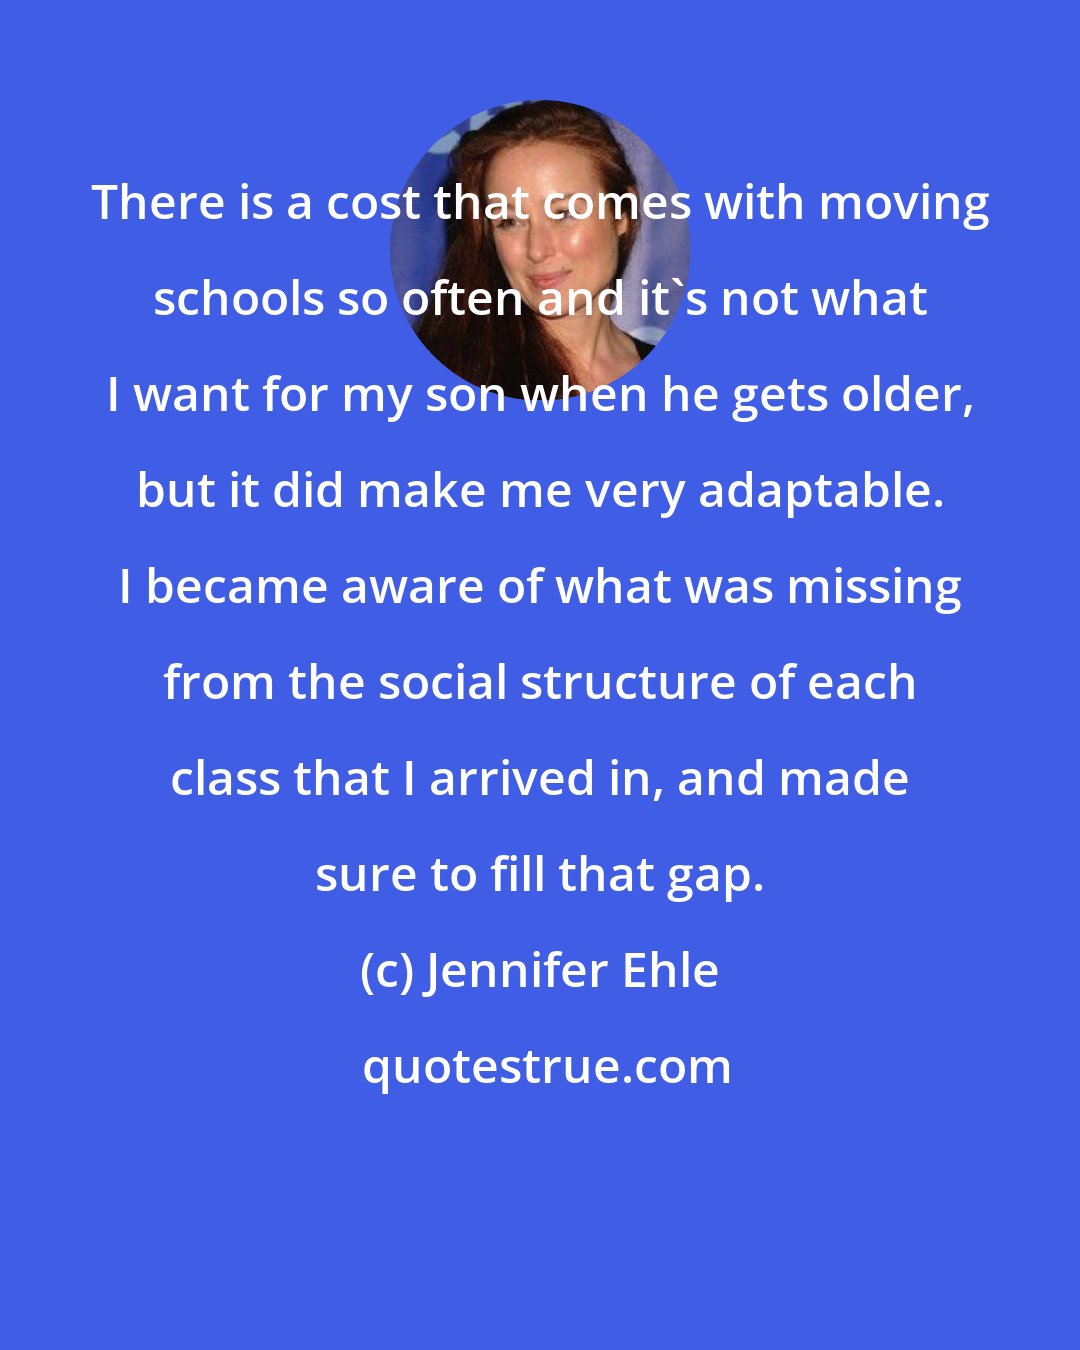 Jennifer Ehle: There is a cost that comes with moving schools so often and it's not what I want for my son when he gets older, but it did make me very adaptable. I became aware of what was missing from the social structure of each class that I arrived in, and made sure to fill that gap.